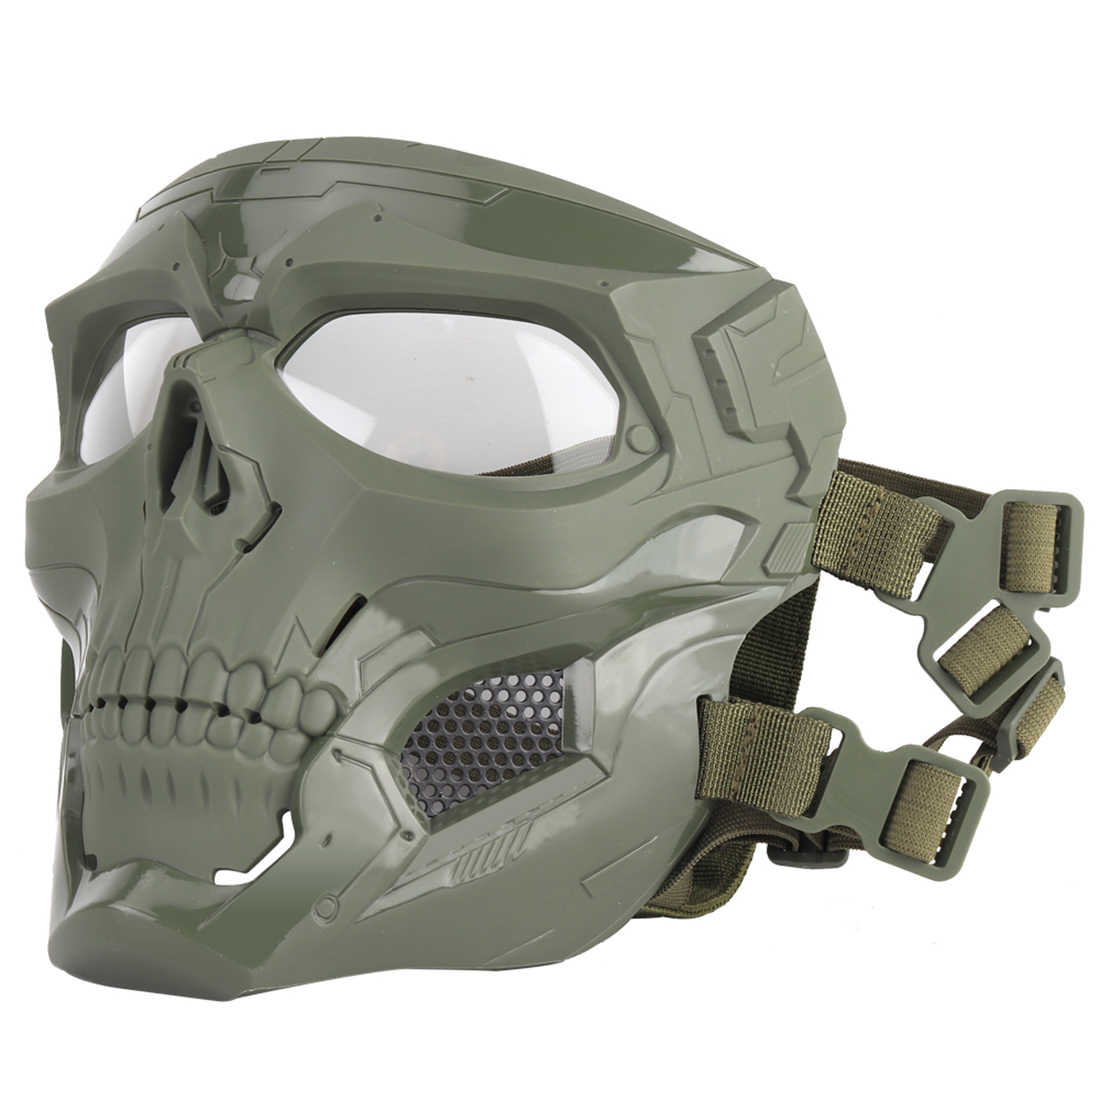 Halloween Maske Luxus Surwish Wst Skull Tactical Mask Halloween Party Games Face